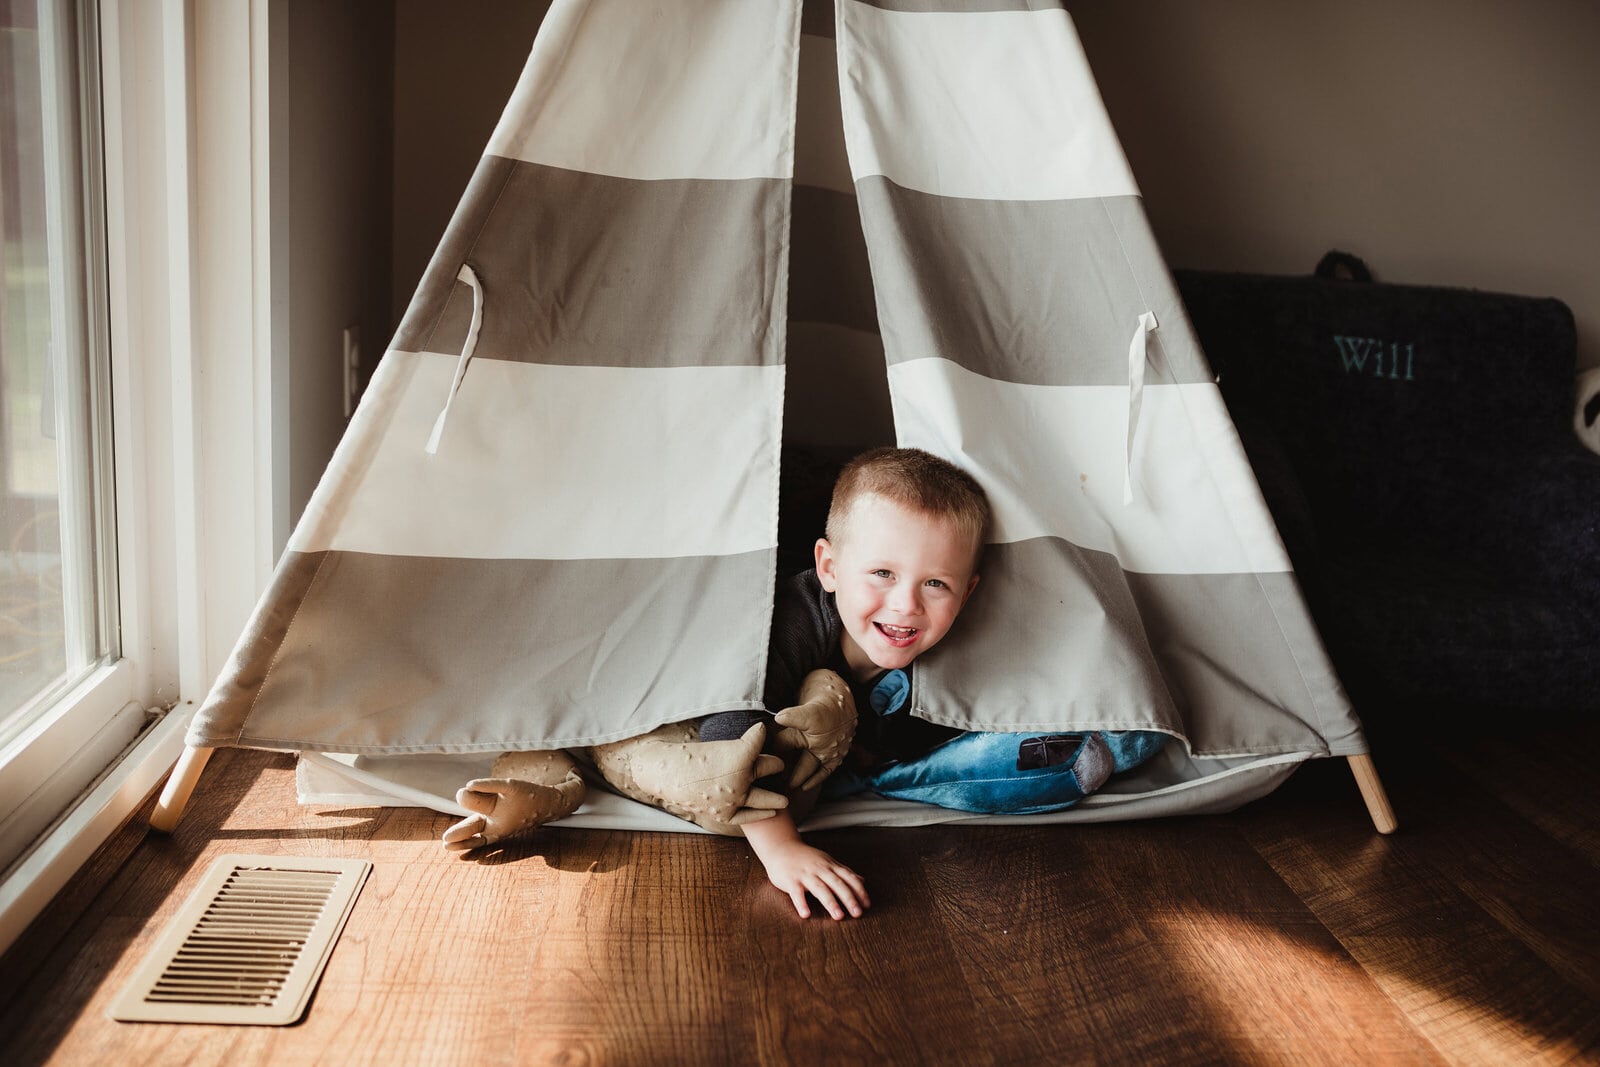 A little boy plays in his teepee while peeking out and laughing.